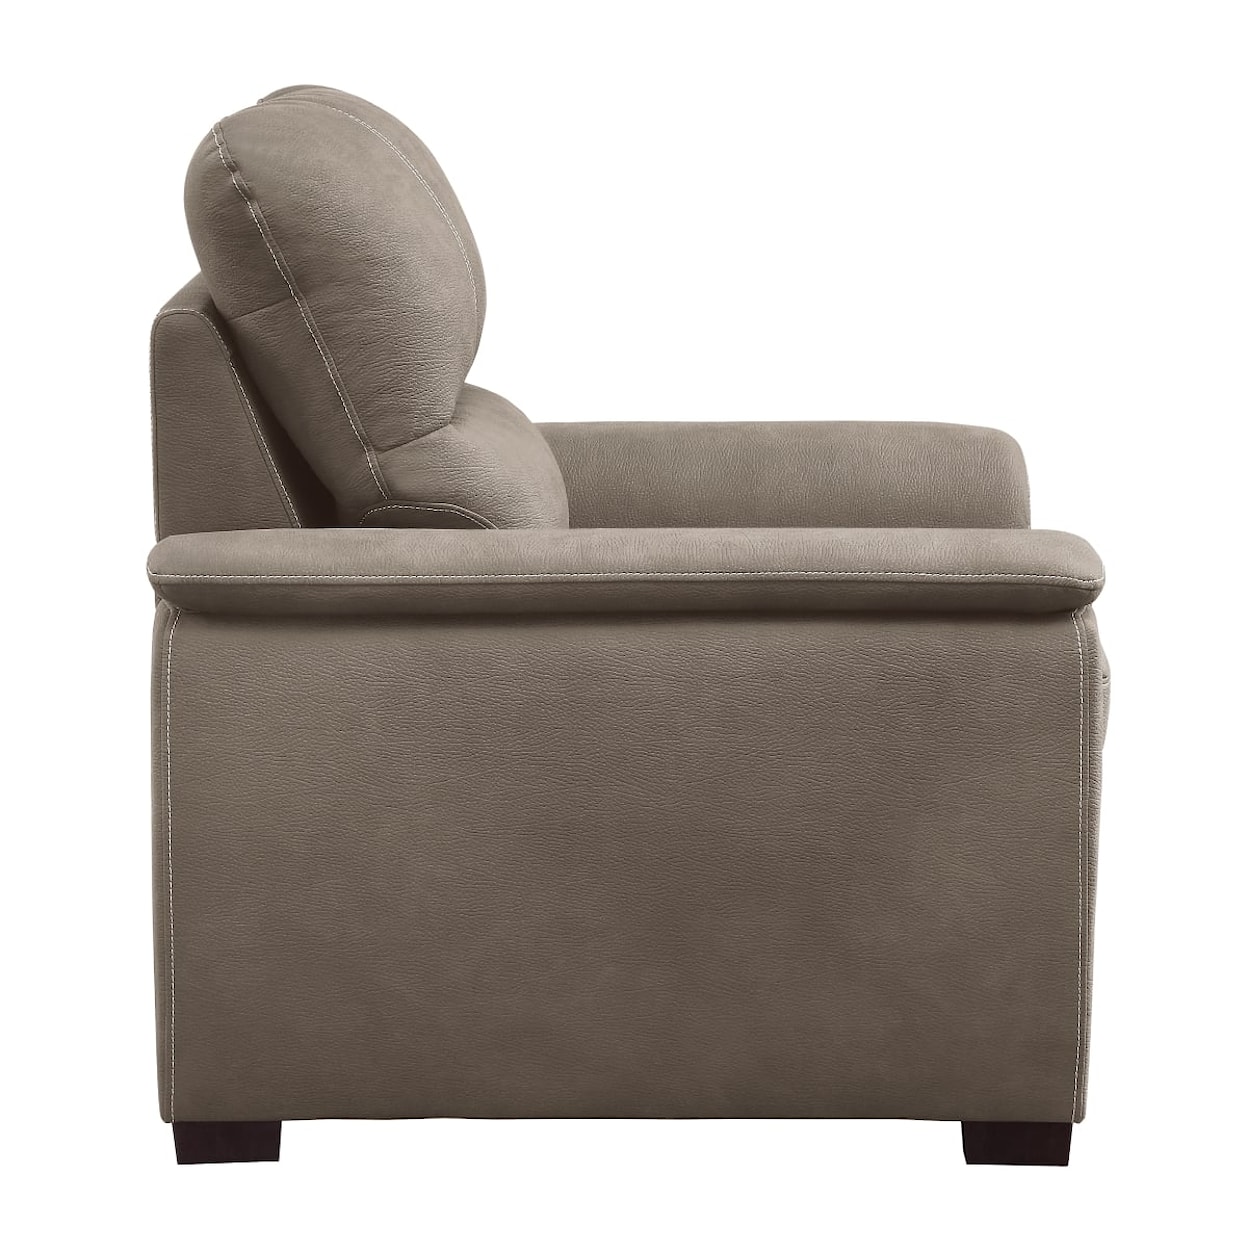 Homelegance Andes Chair with Pull-out Ottoman